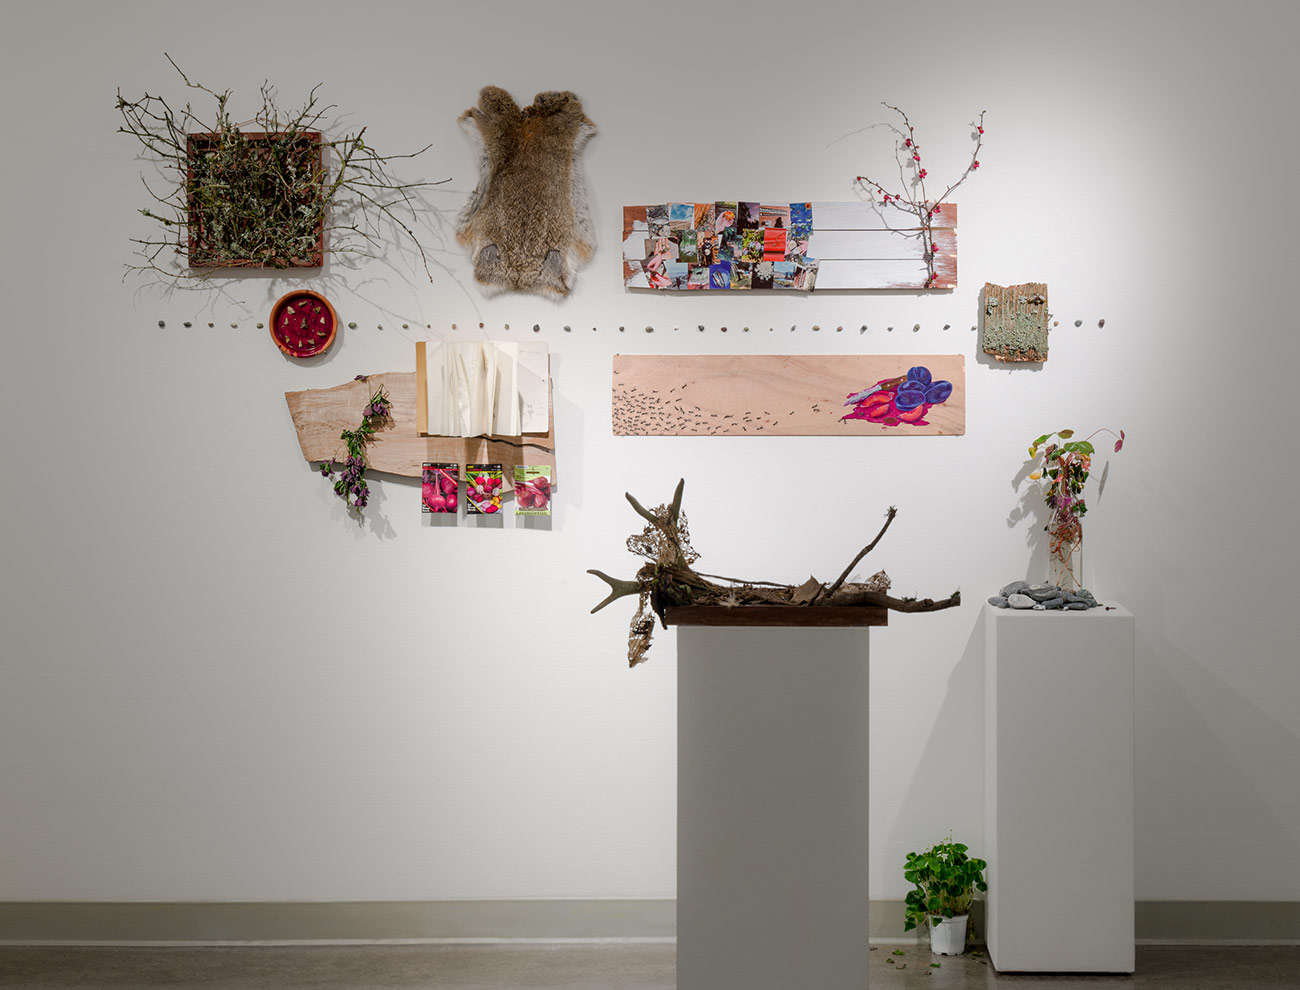 Photograph of work by Maggie Brown installed in the Vachon Gallery